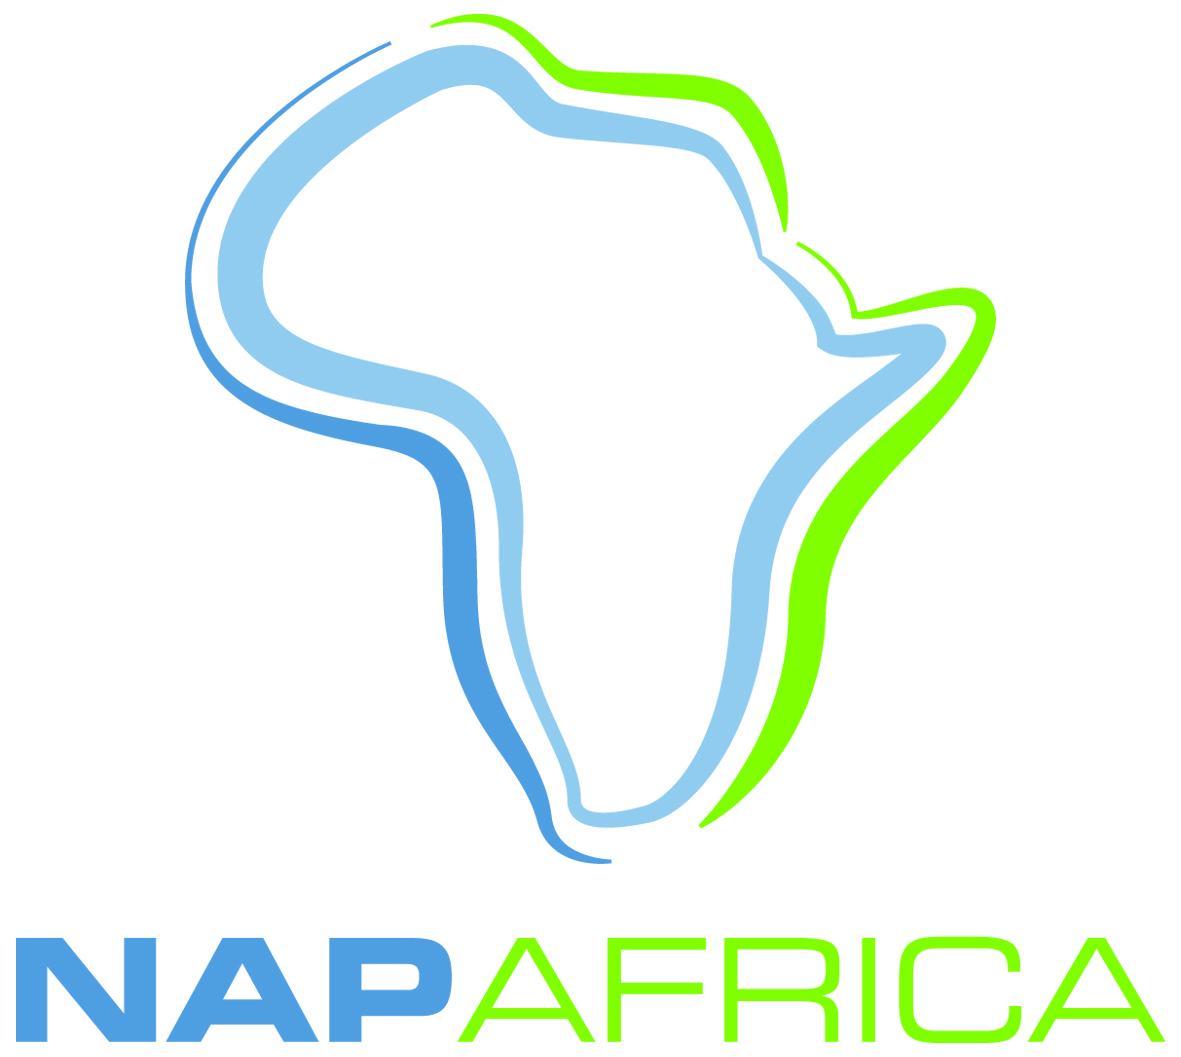 Angola Cables to Peer at NAPAfrica – Africa’s Most Connected Internet Exchange